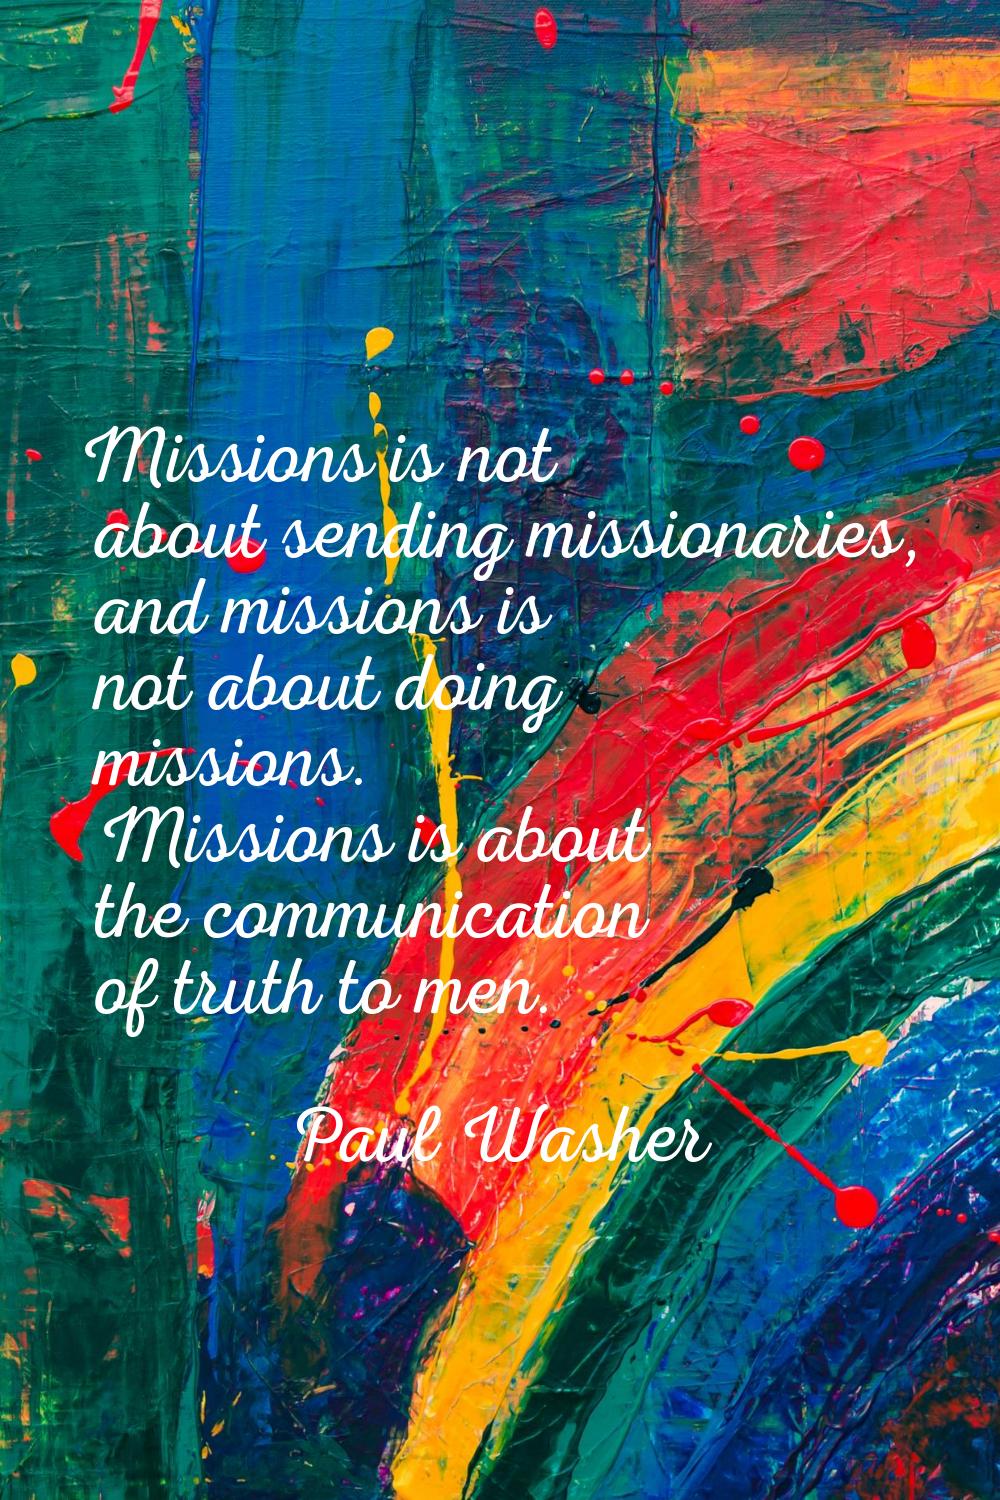 Missions is not about sending missionaries, and missions is not about doing missions. Missions is a